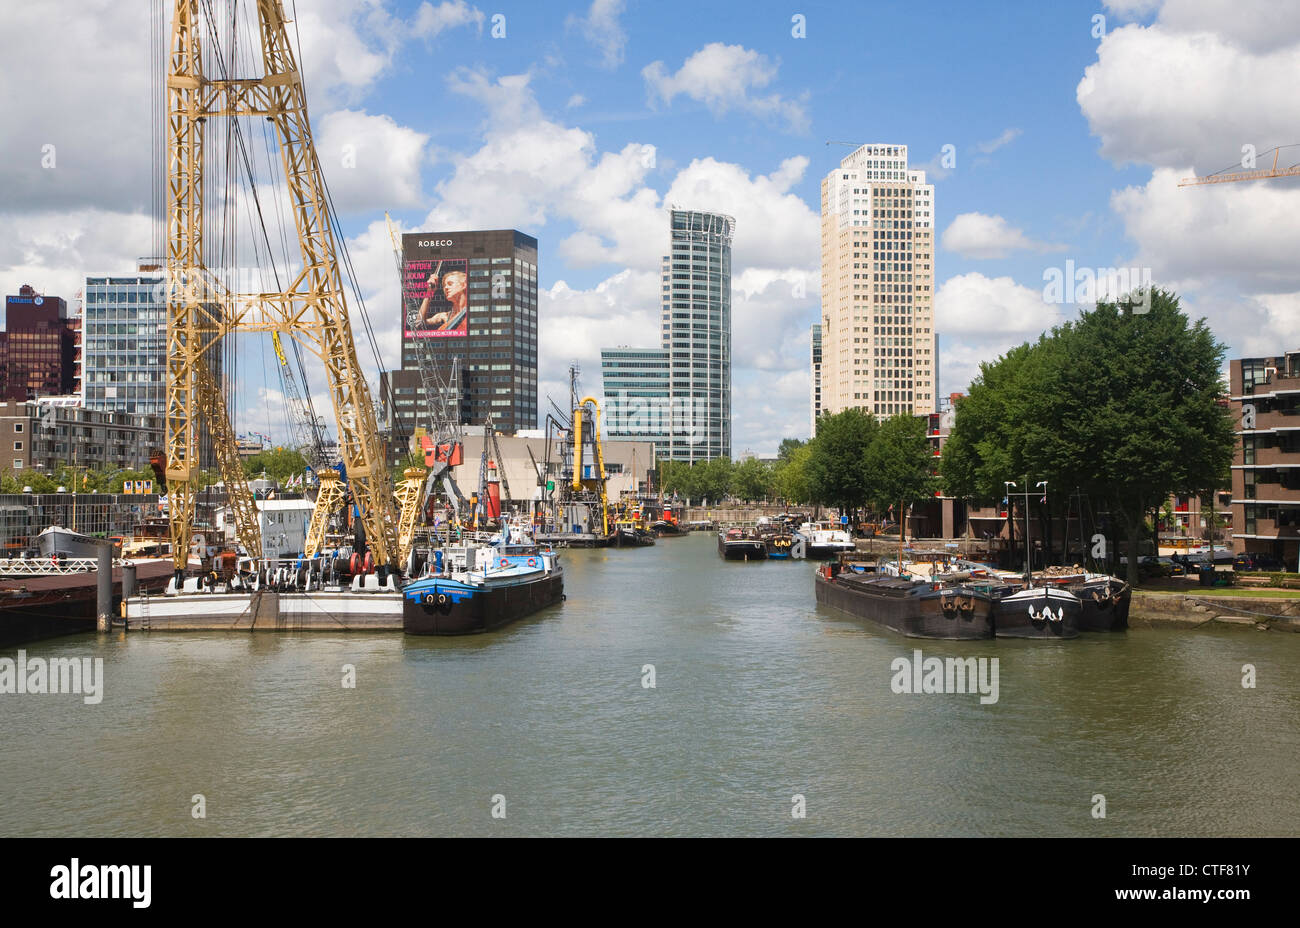 Historic boats modern high rise architecture Haven harbour museum Rotterdam Netherlands Stock Photo